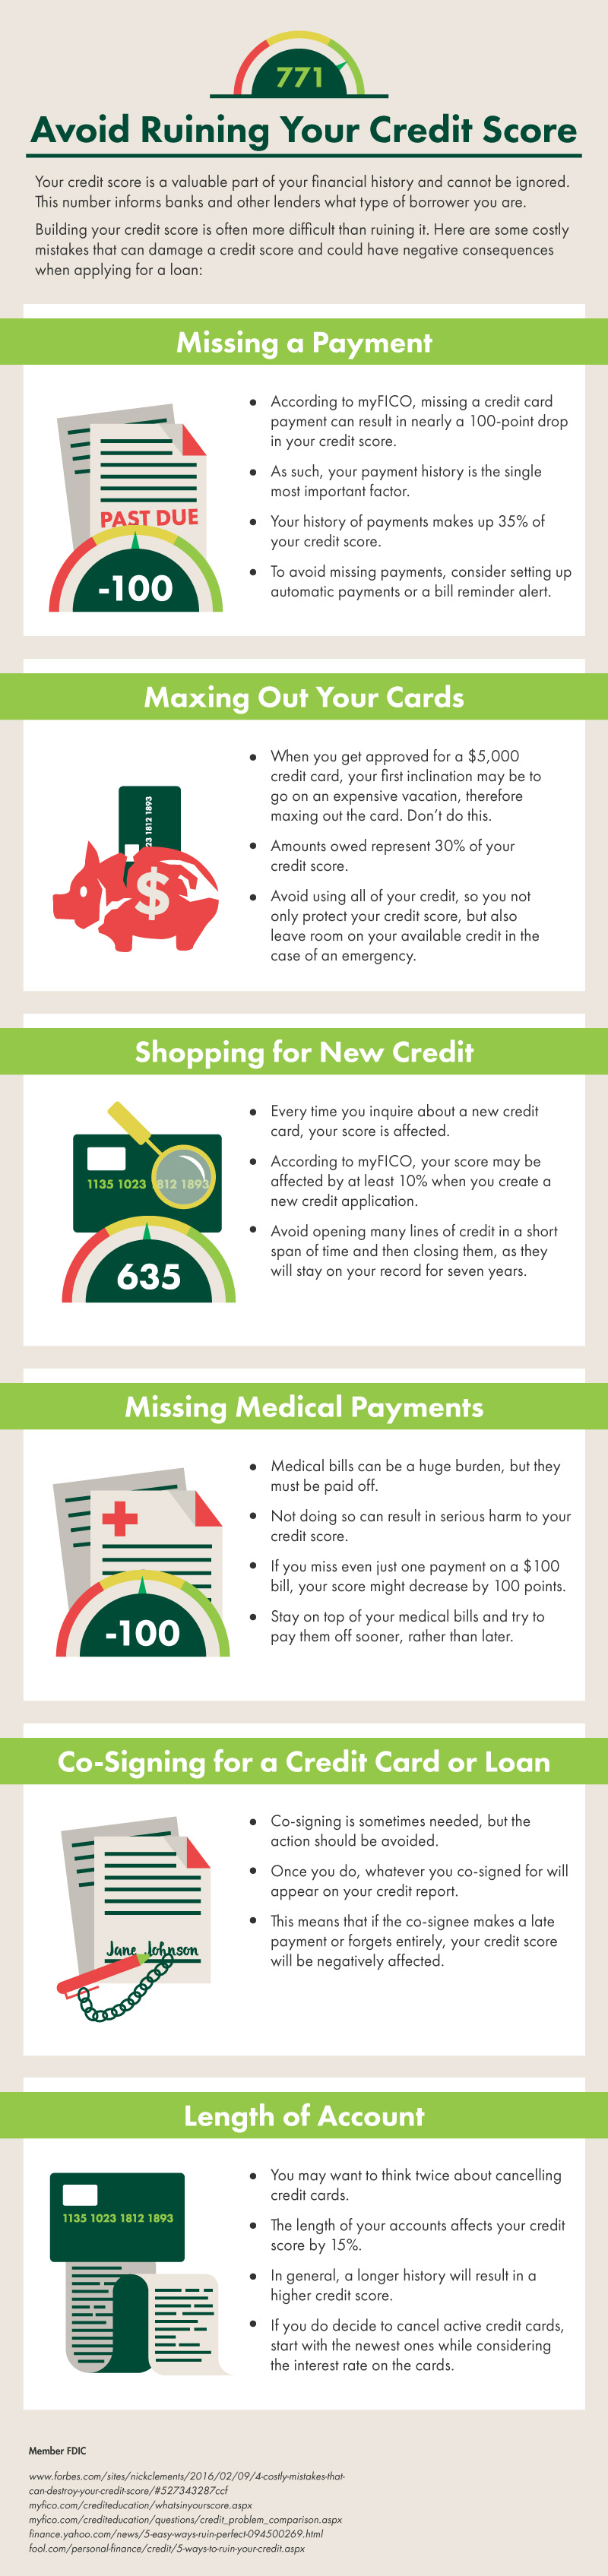 An infographic showing six mistakes people make that can lower their credit scores